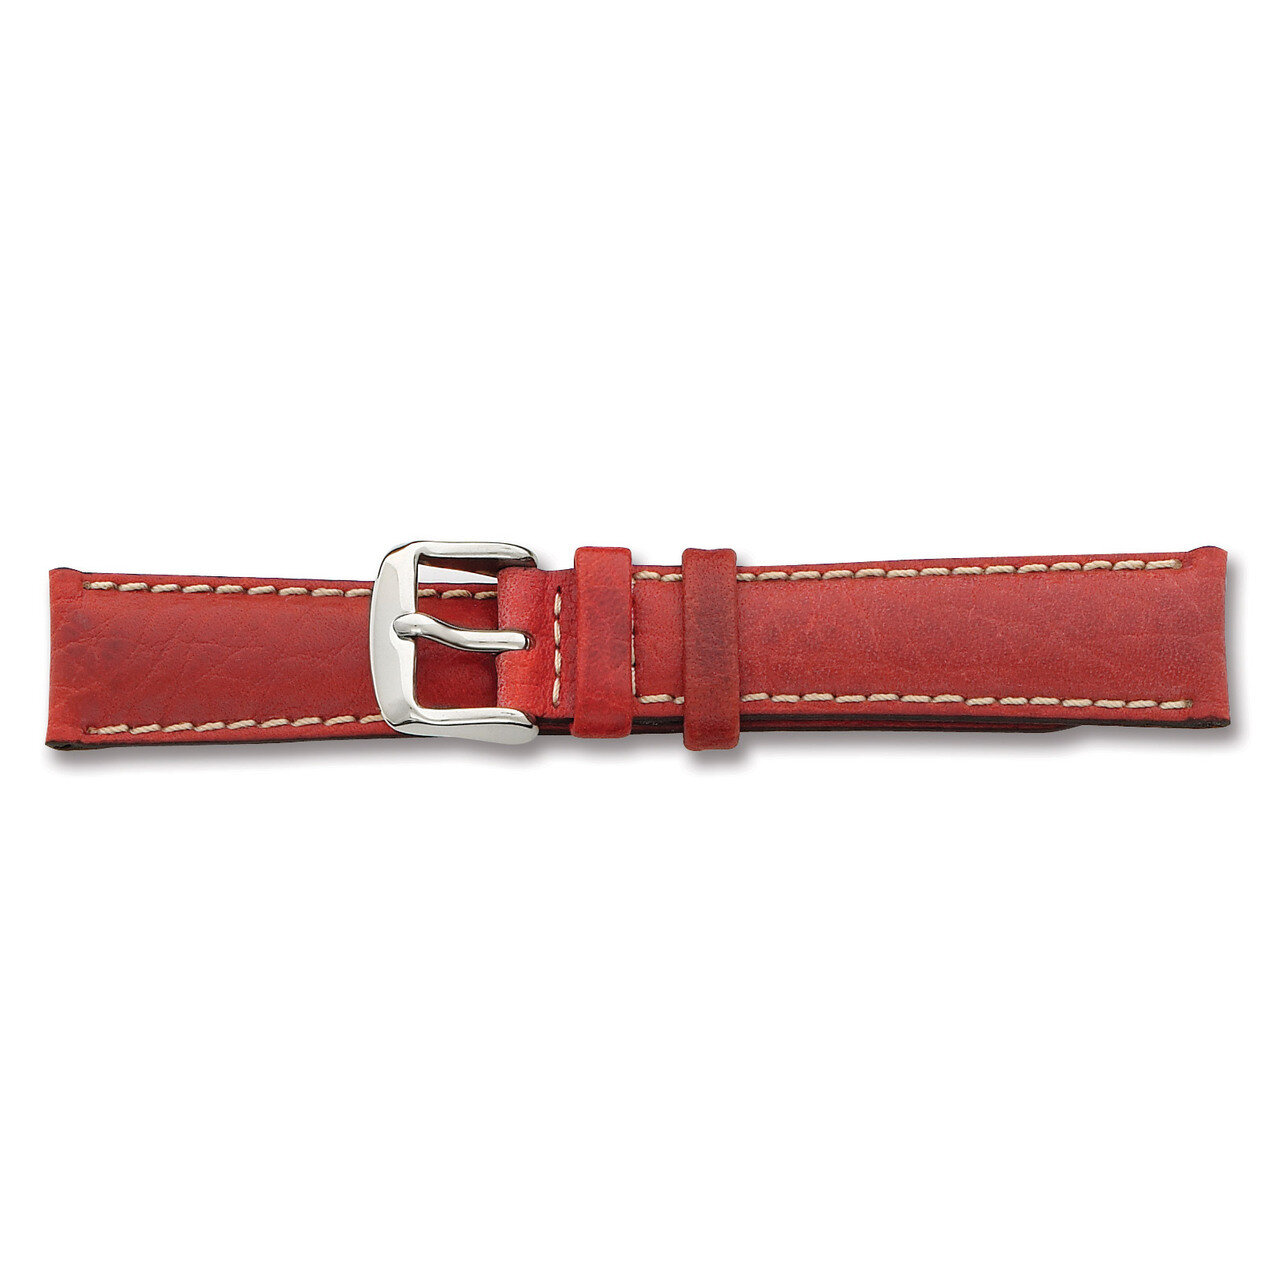 18mm Red Sport Leather White Stitch Watch Band 7.5 Inch Silver-tone Buckle BA138-18